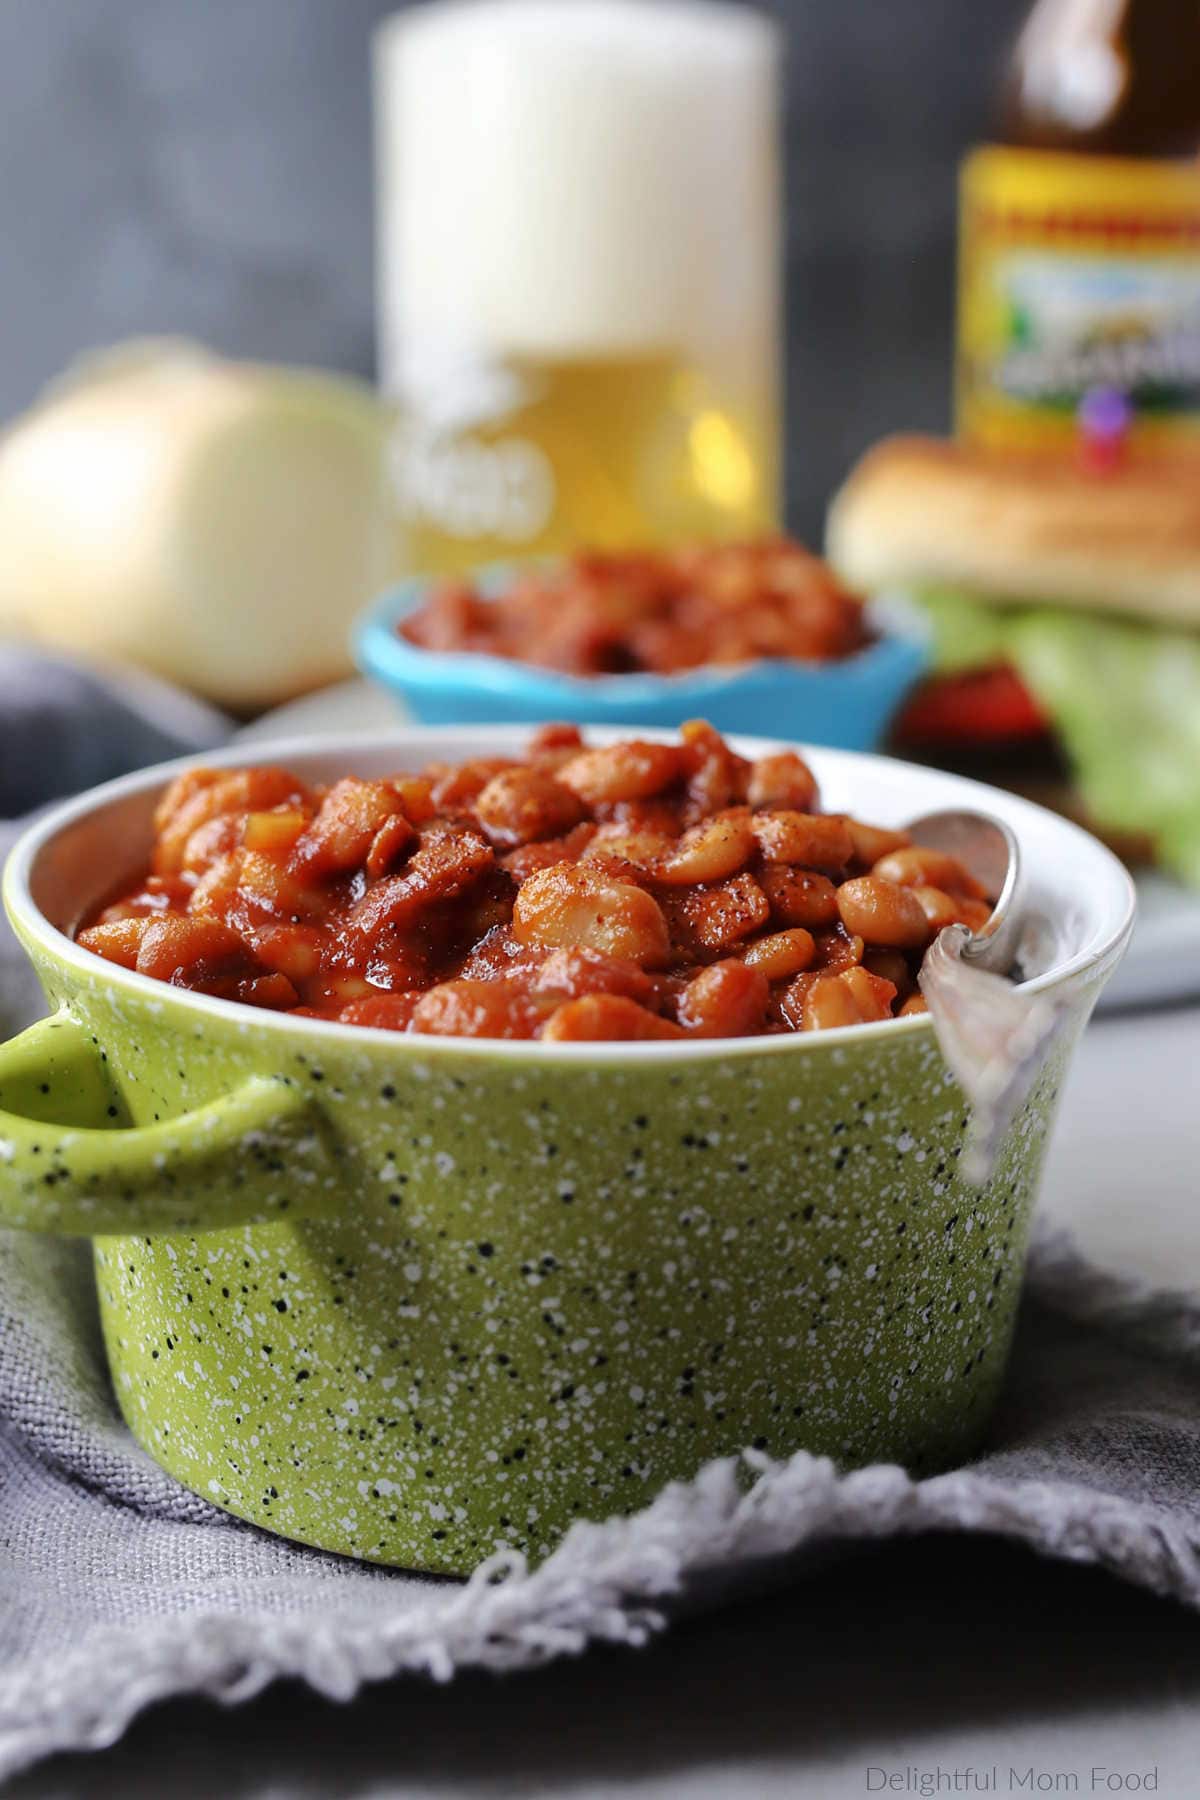 Boston style homemade gluten free baked beans in sauce in a green bowl on a towel